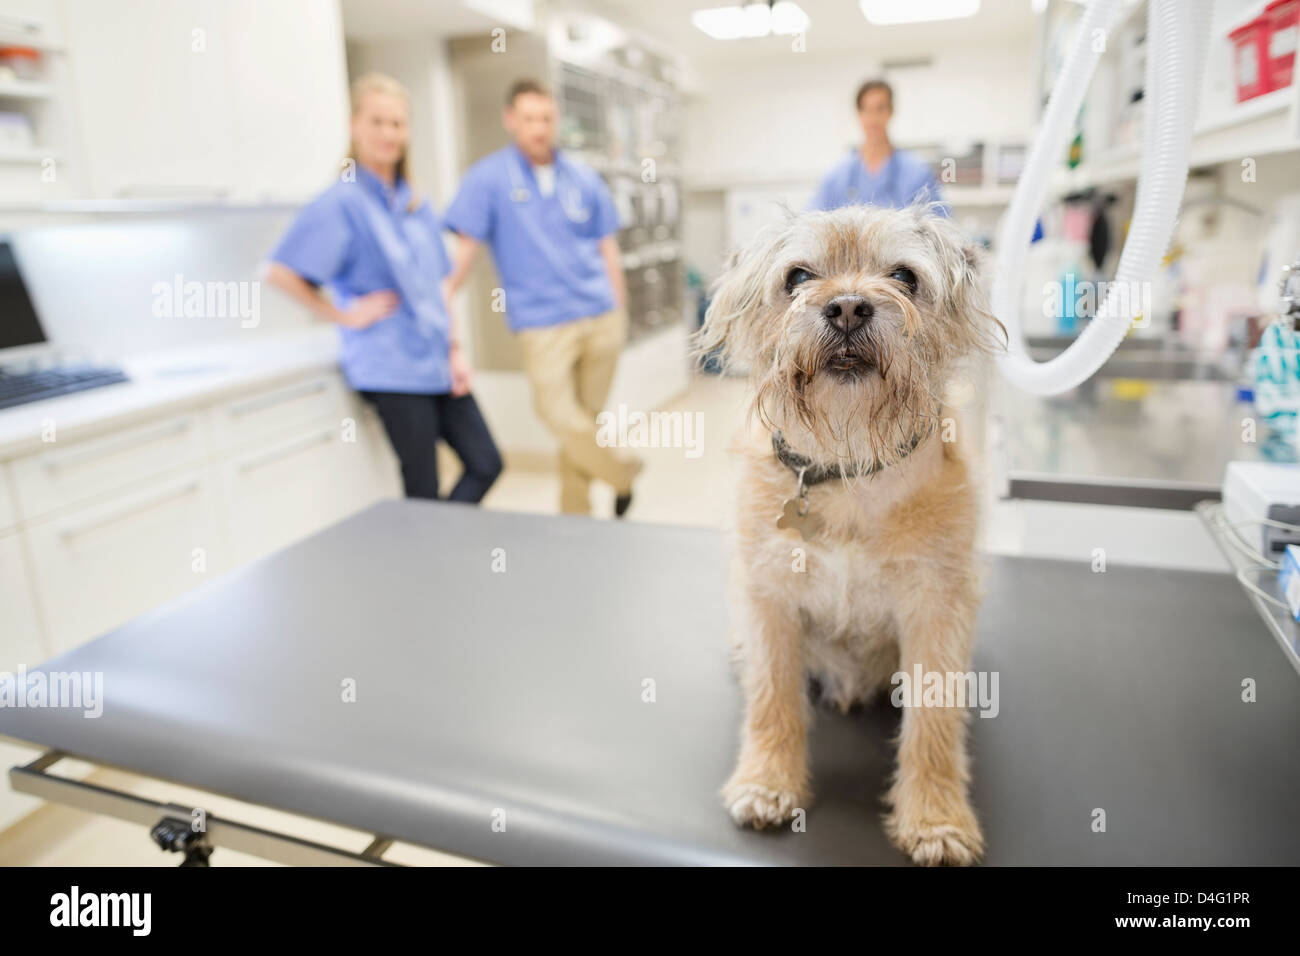 Dog sitting on table in vet's surgery Stock Photo